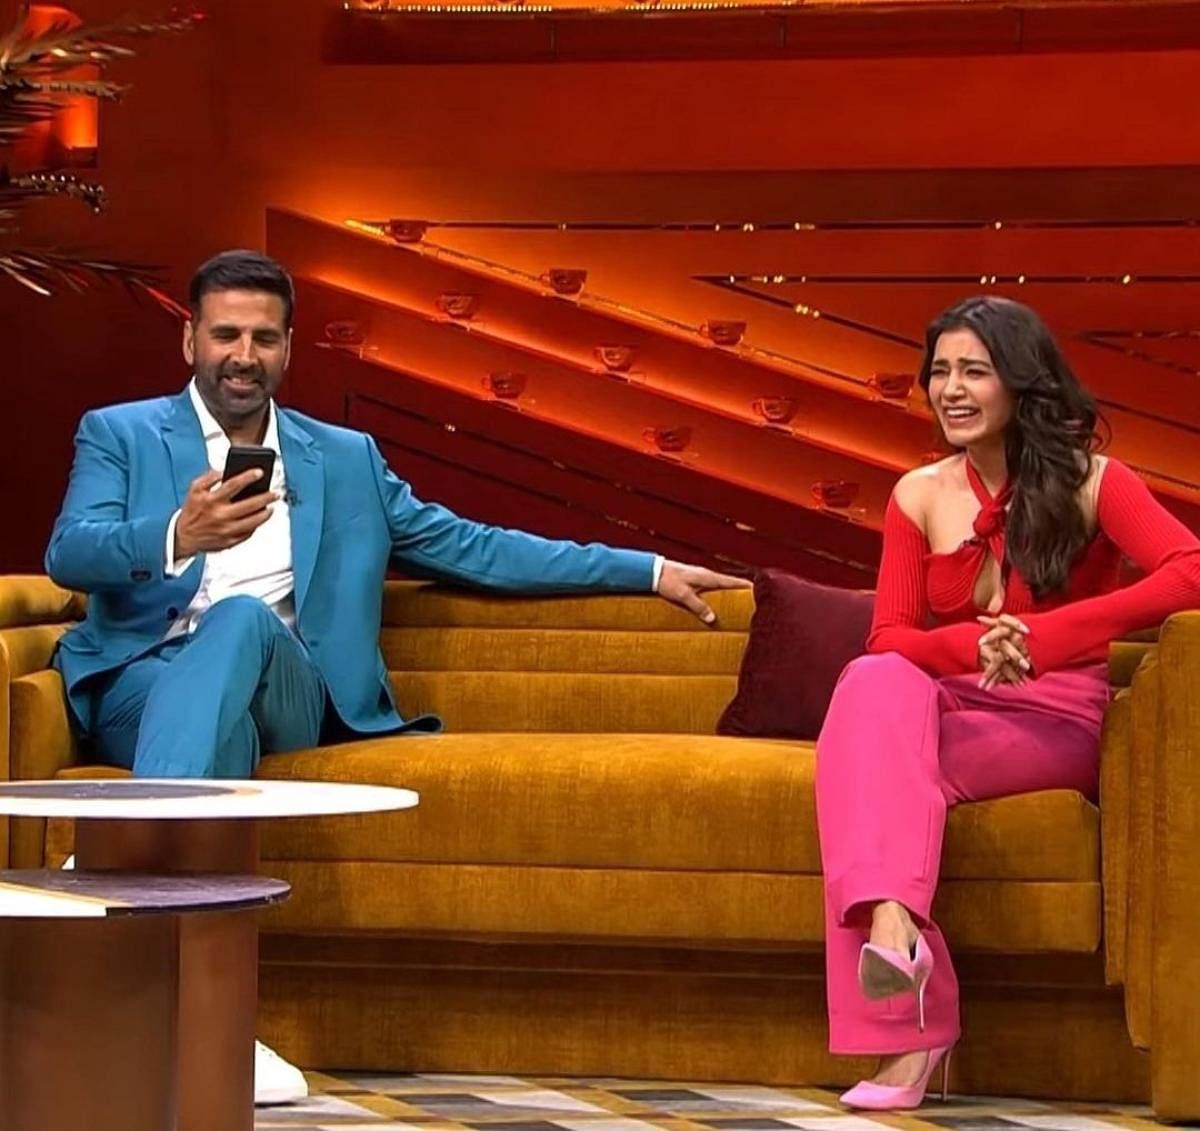 Among those who have appeared on the show so far, Samantha Ruth Prabhu who participated with Akshay Kumar, stood out with her wit and intelligence.